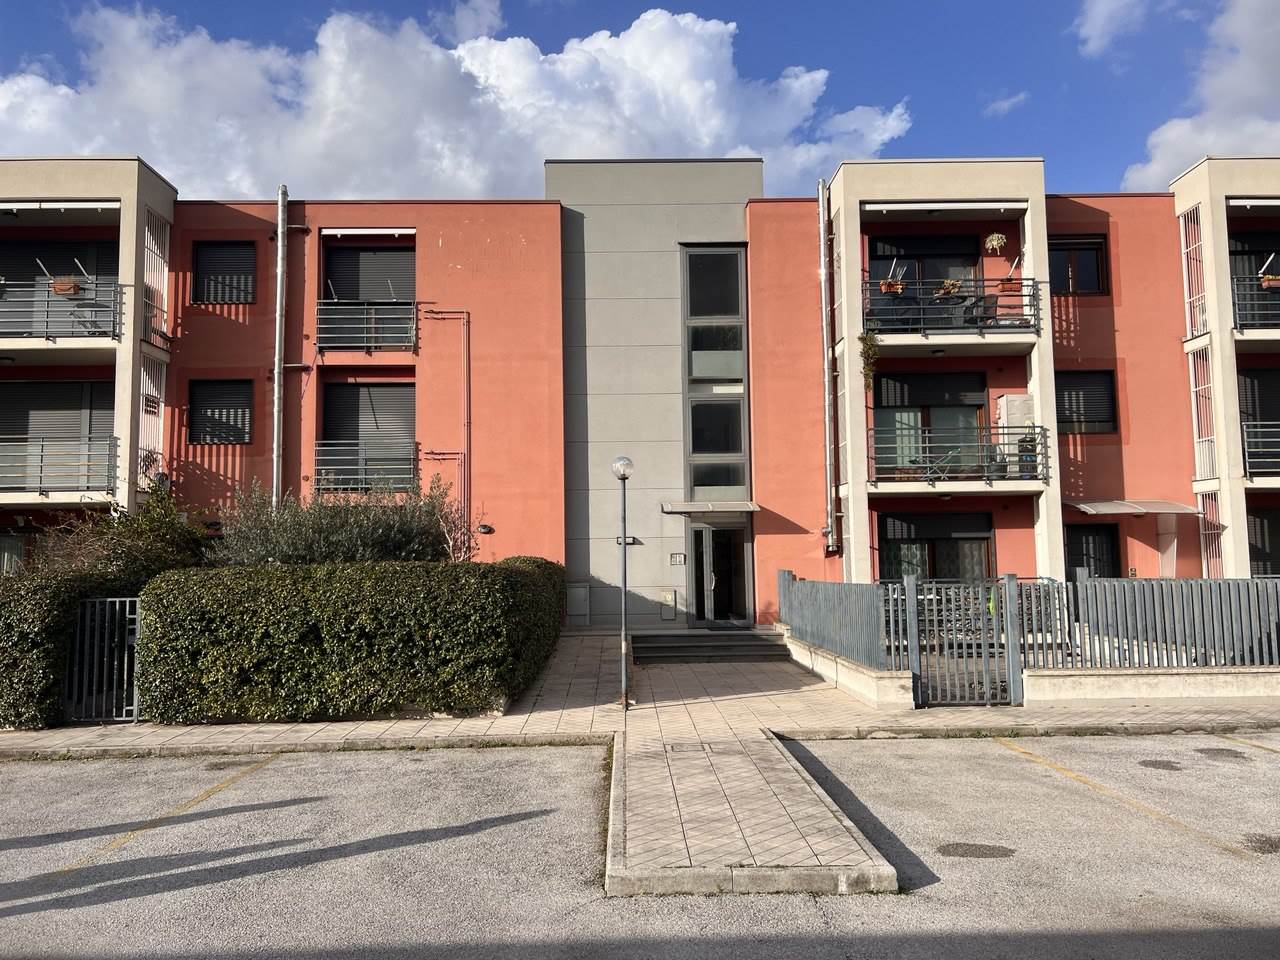 FRATTE, SALERNO, Apartment for sale of 80 Sq. mt., Almost new, Heating Individual heating system, Energetic class: G, placed at 1° on 3, composed by: 